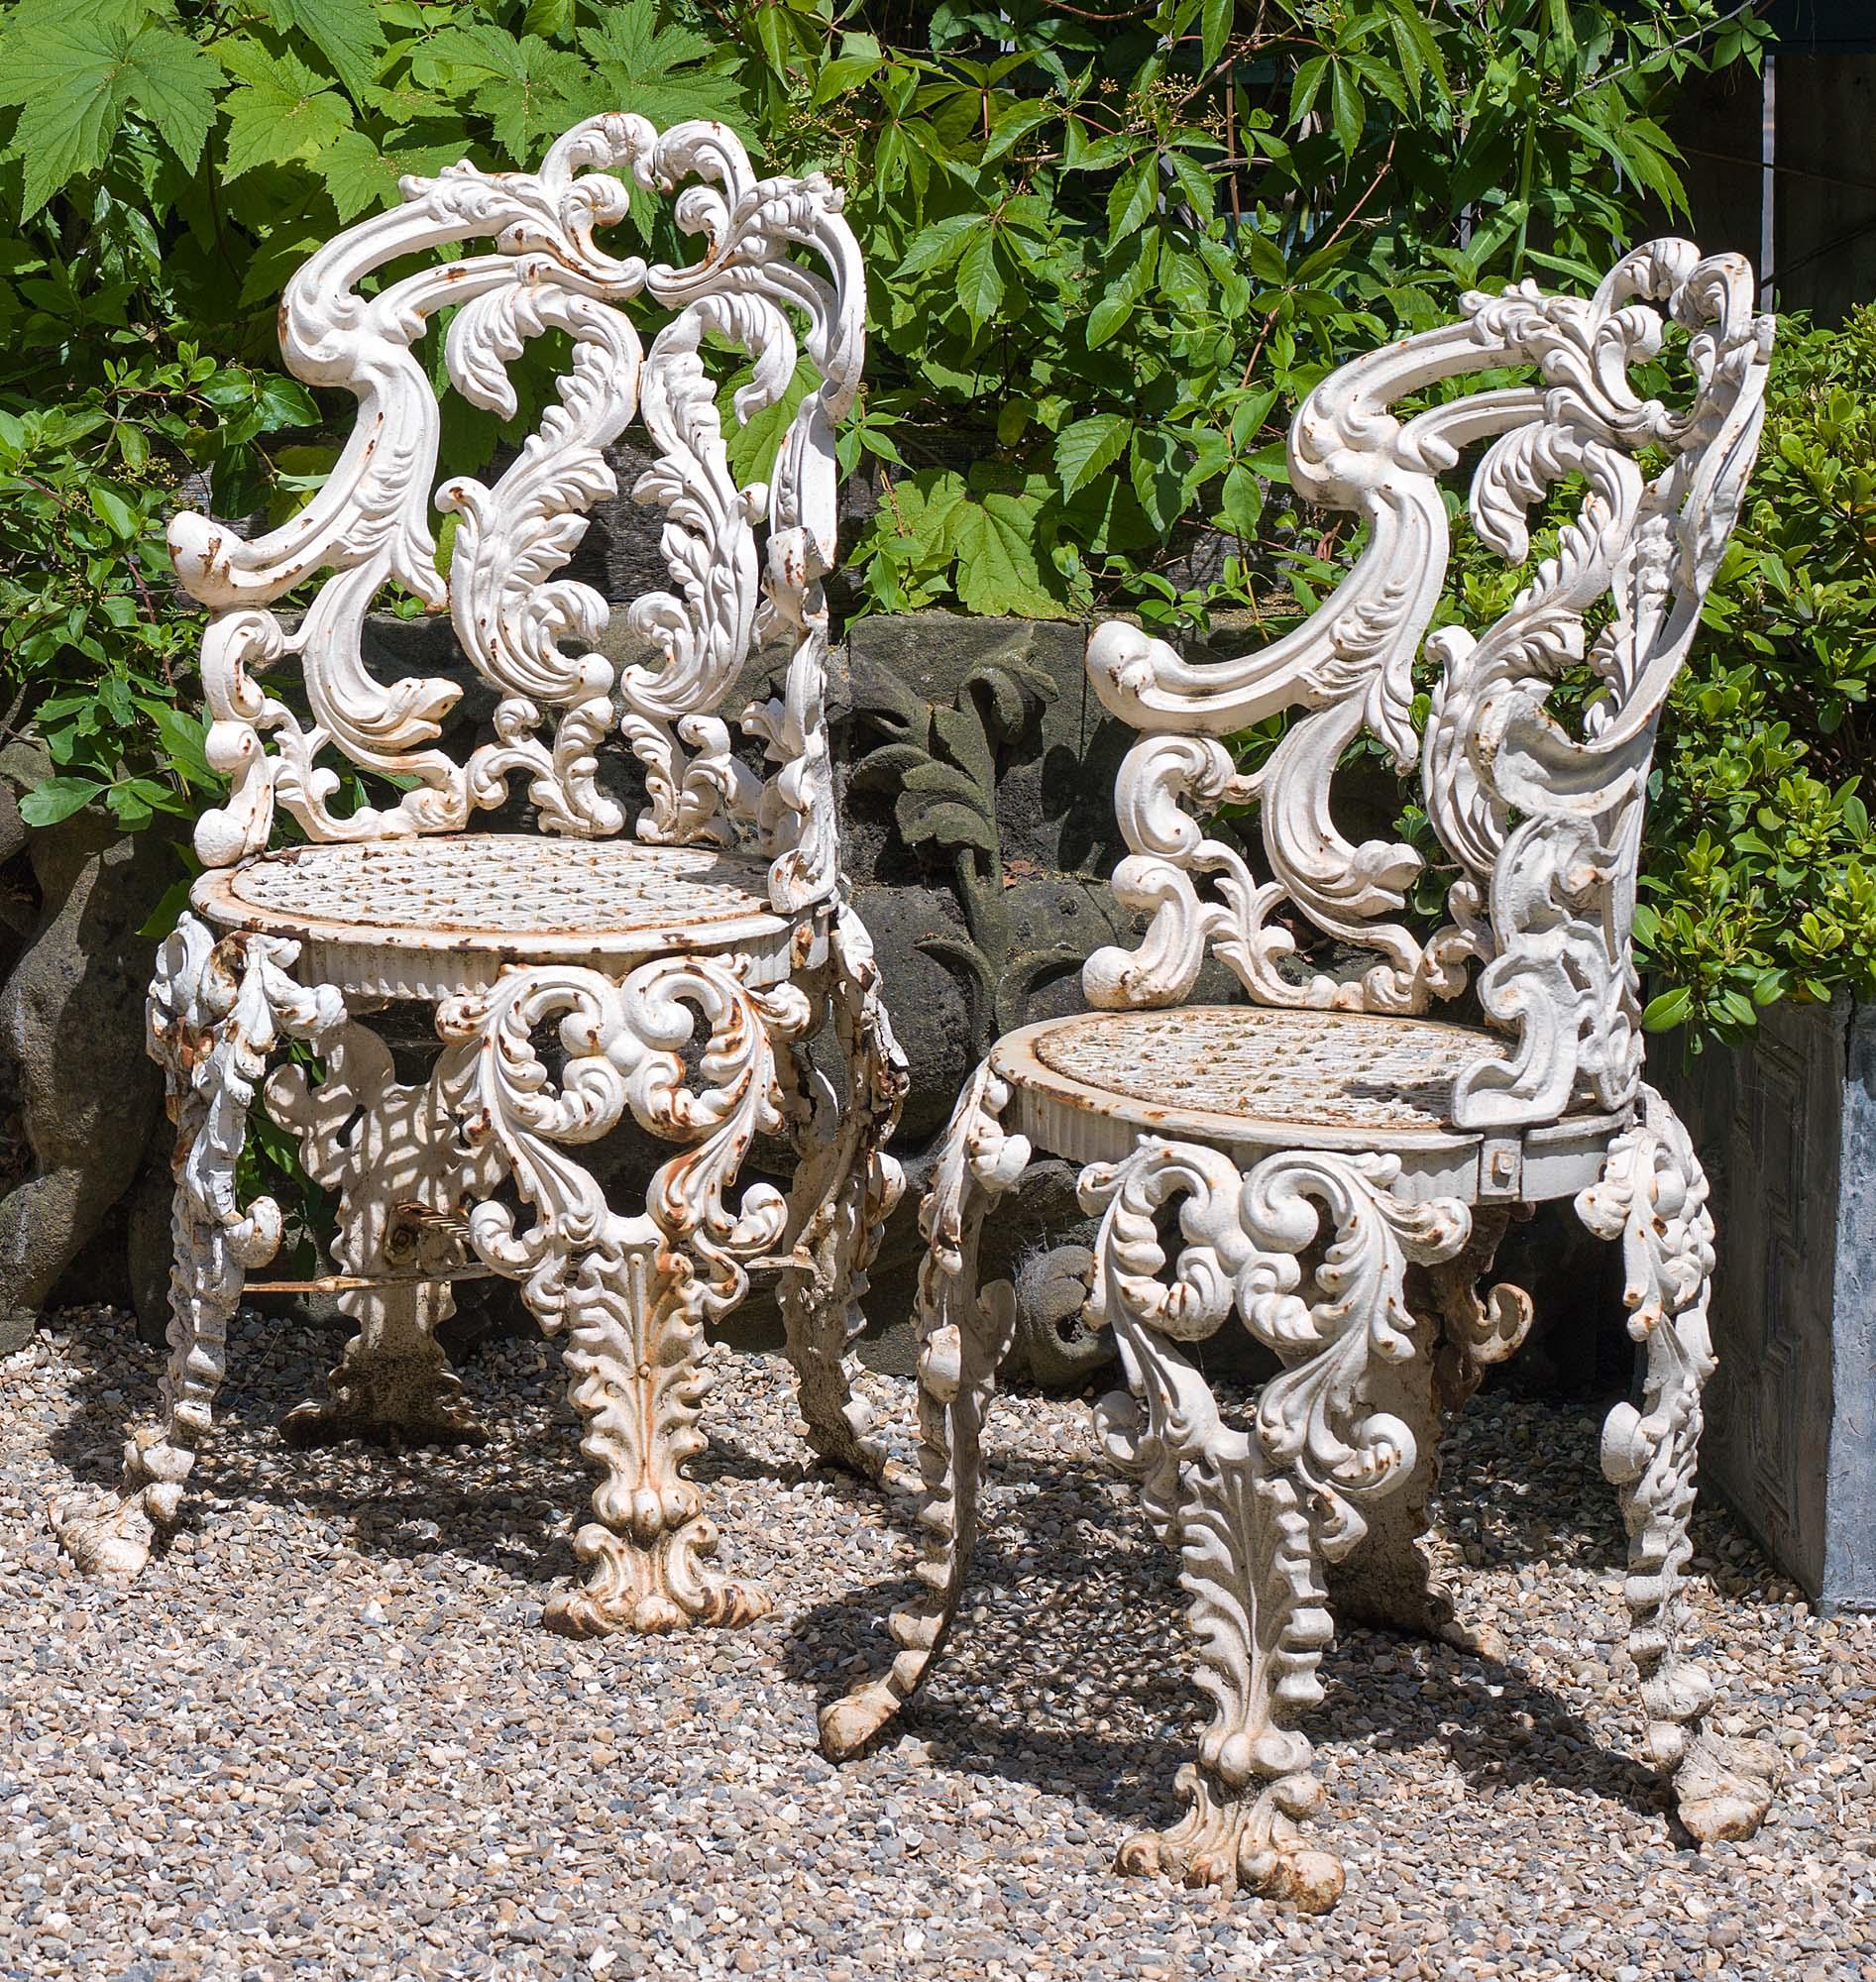 A set of four highly ornate and elegant cast iron Victorian antique garden or conservatory chairs in the Rococo style with oval shaped acanthus scrolled backs, detatchable seats and quadruple splayed legs, English, circa 1850.